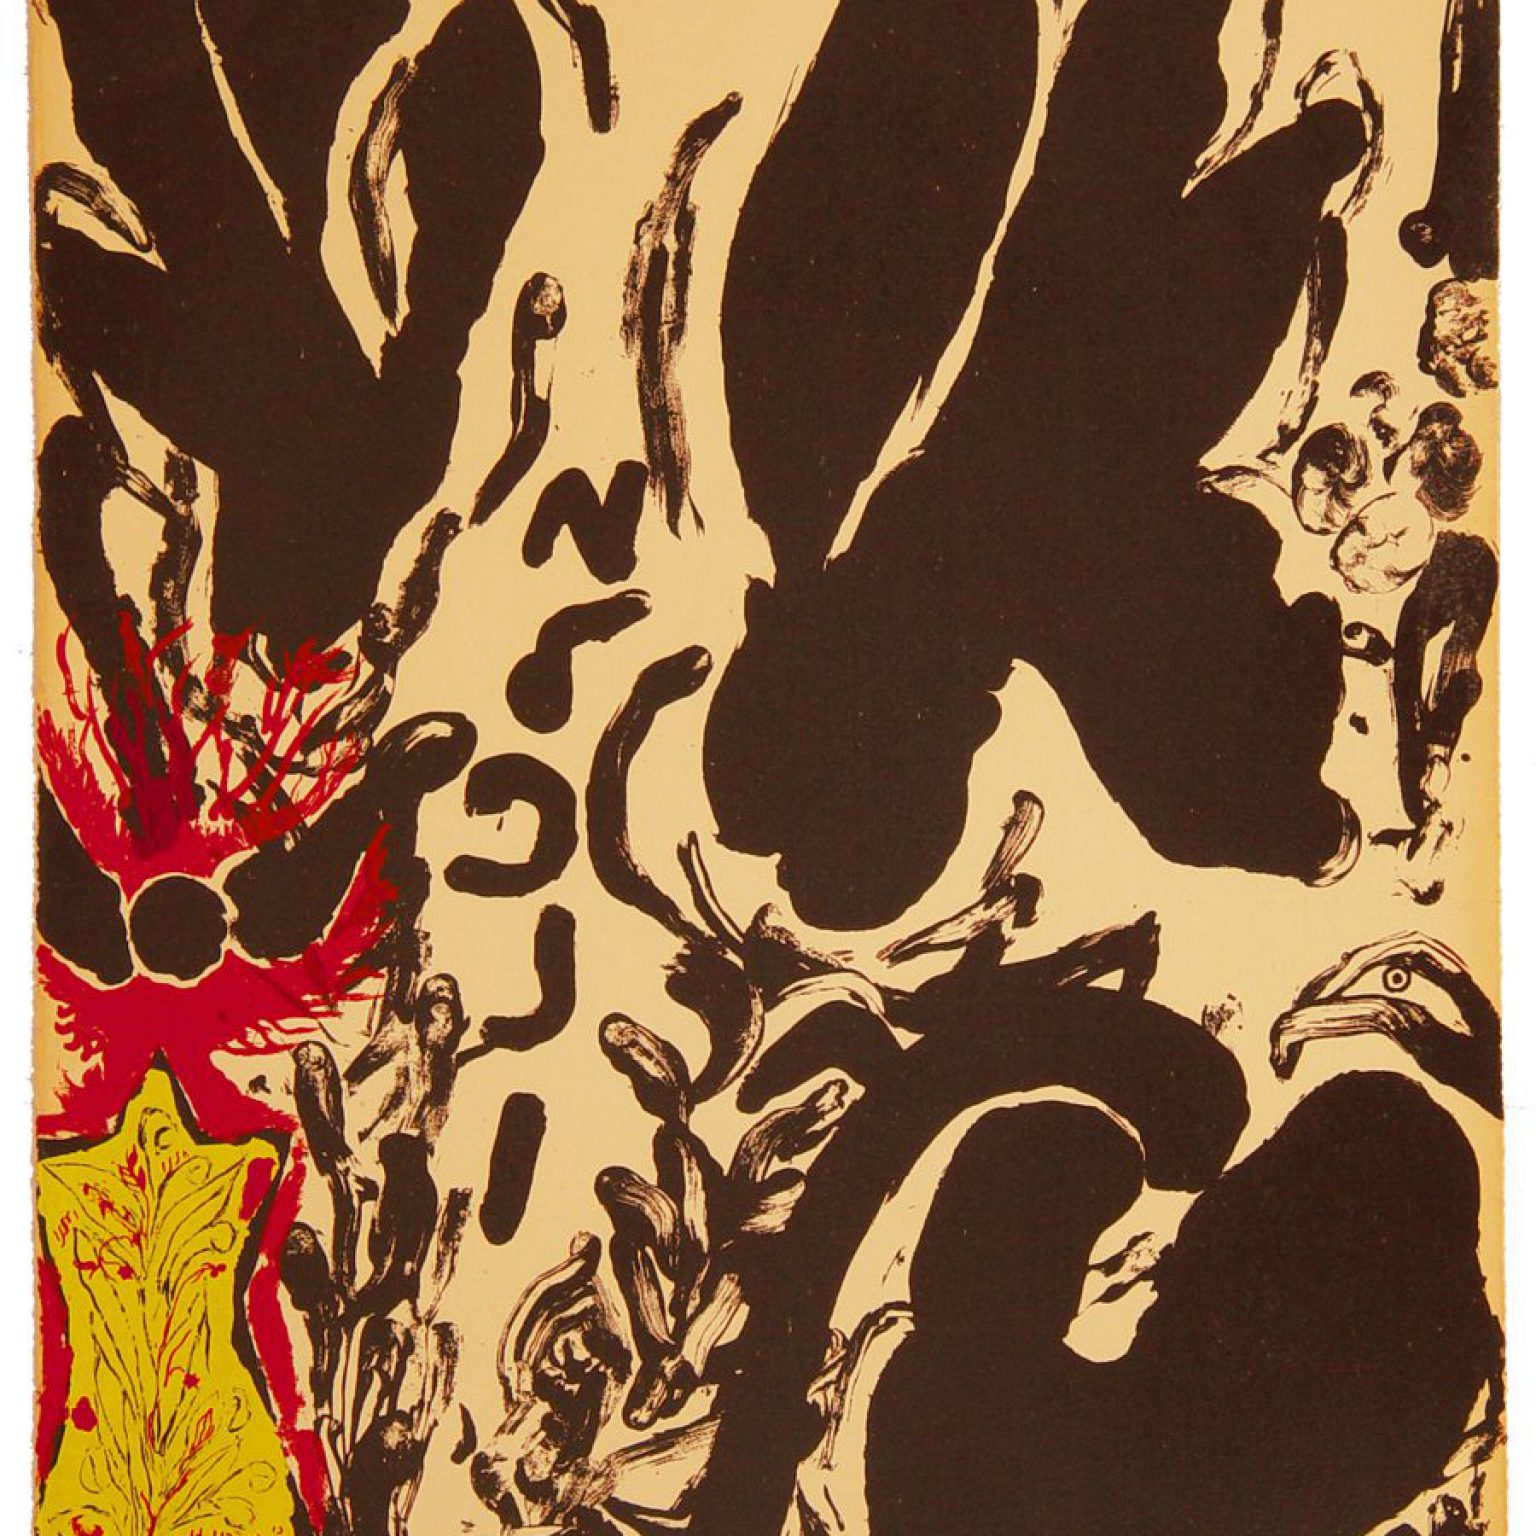 Our Father, Our King, 1984, Screenprint, 80 x 65 cm, Edition: 18